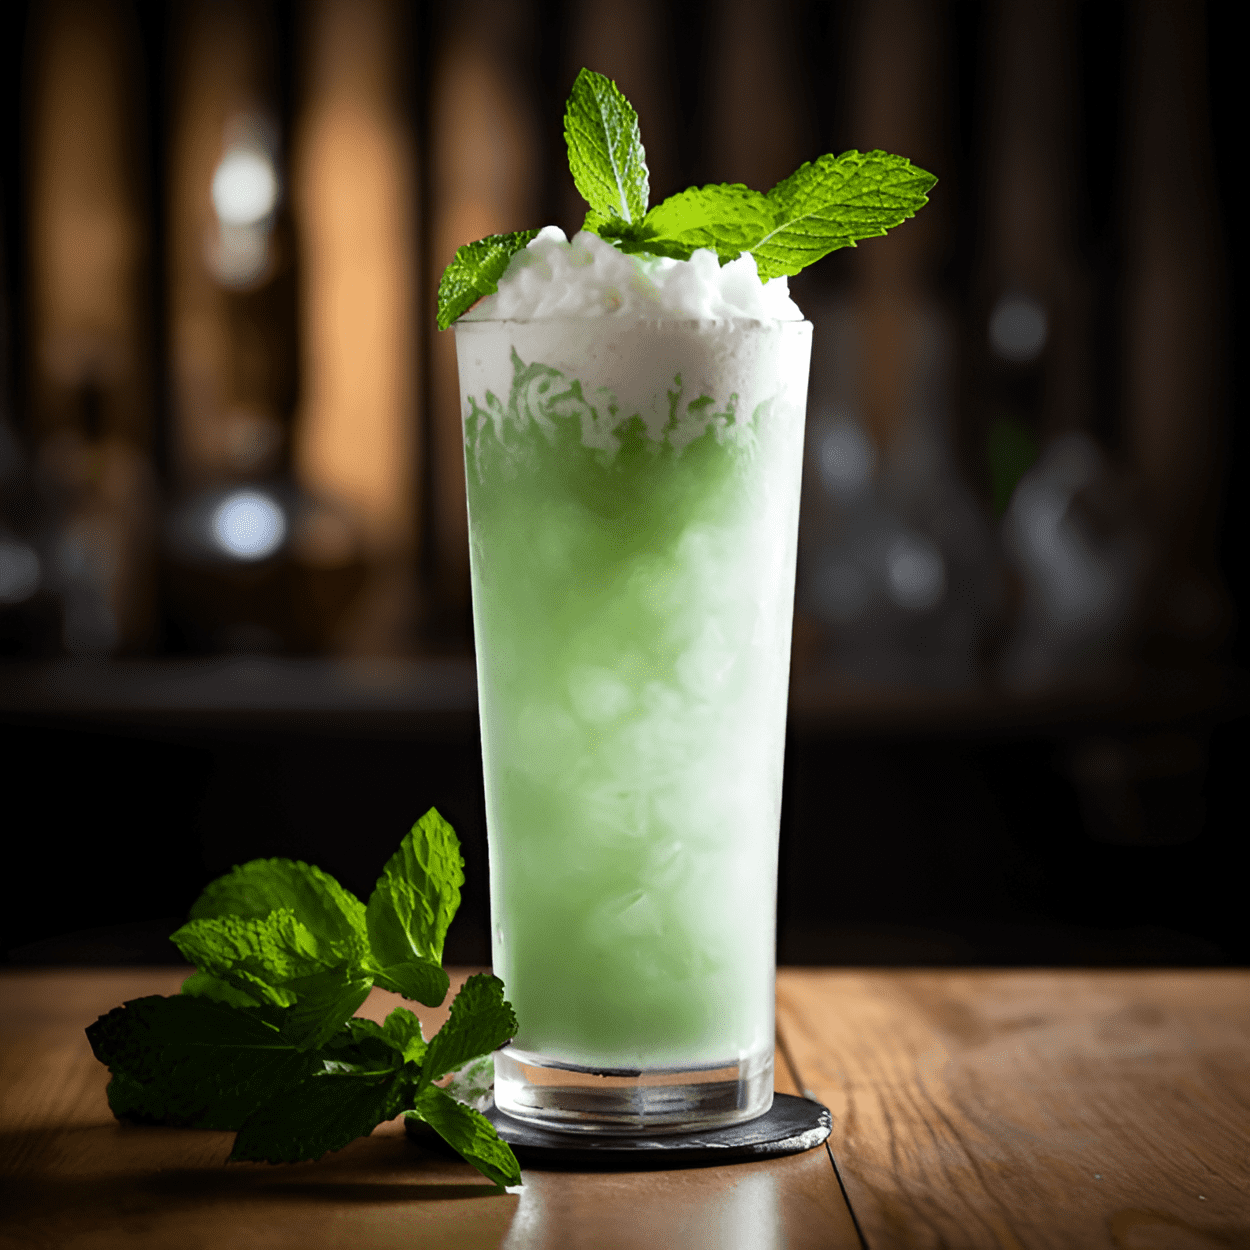 Minty White Russian Cocktail Recipe - The Minty White Russian is a creamy, sweet cocktail with a strong kick from the vodka. The coffee liqueur adds a deep, rich flavor, while the mint provides a refreshing aftertaste. It's a well-balanced drink that's both indulgent and refreshing.